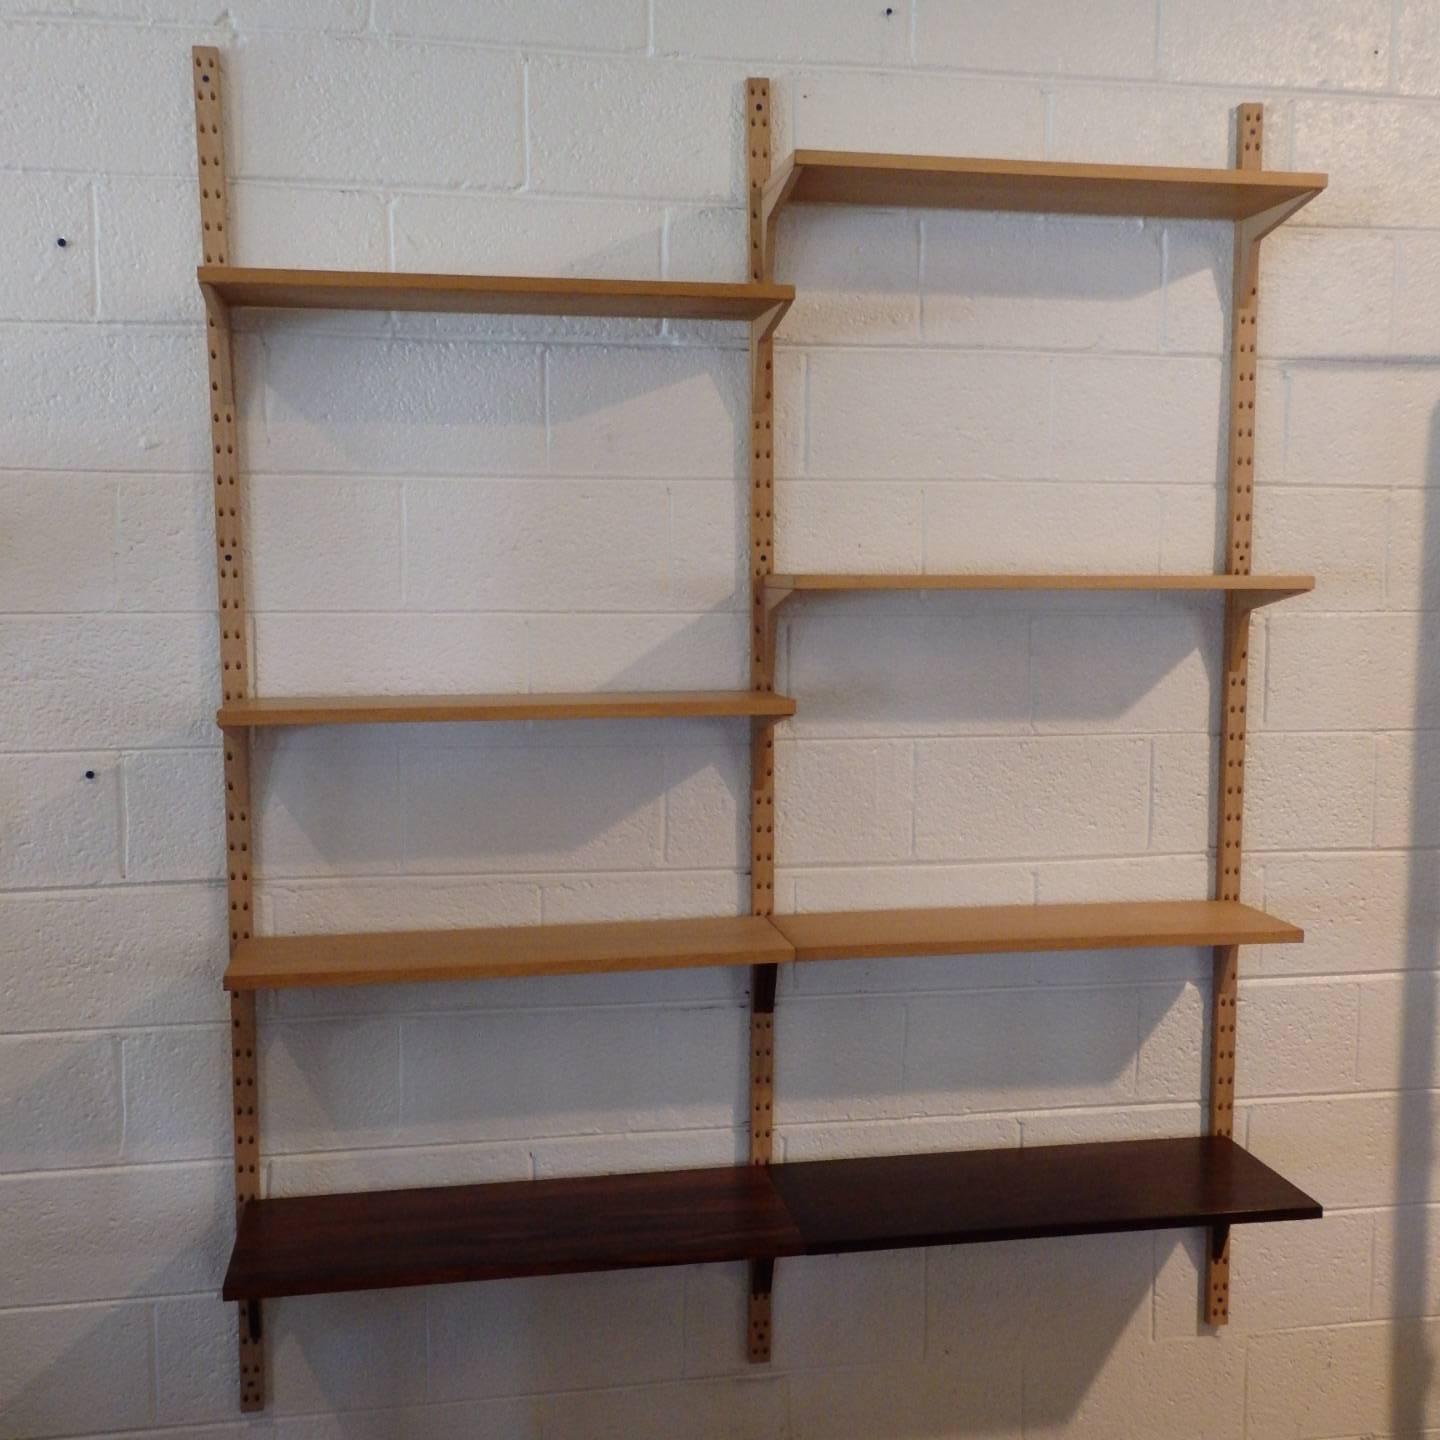 Very nice Cado system all pieces were pulled from the original boxes. Two lower shelves are palisander. Smaller top shelves are white oak. Up rights are white oak. All excellent.